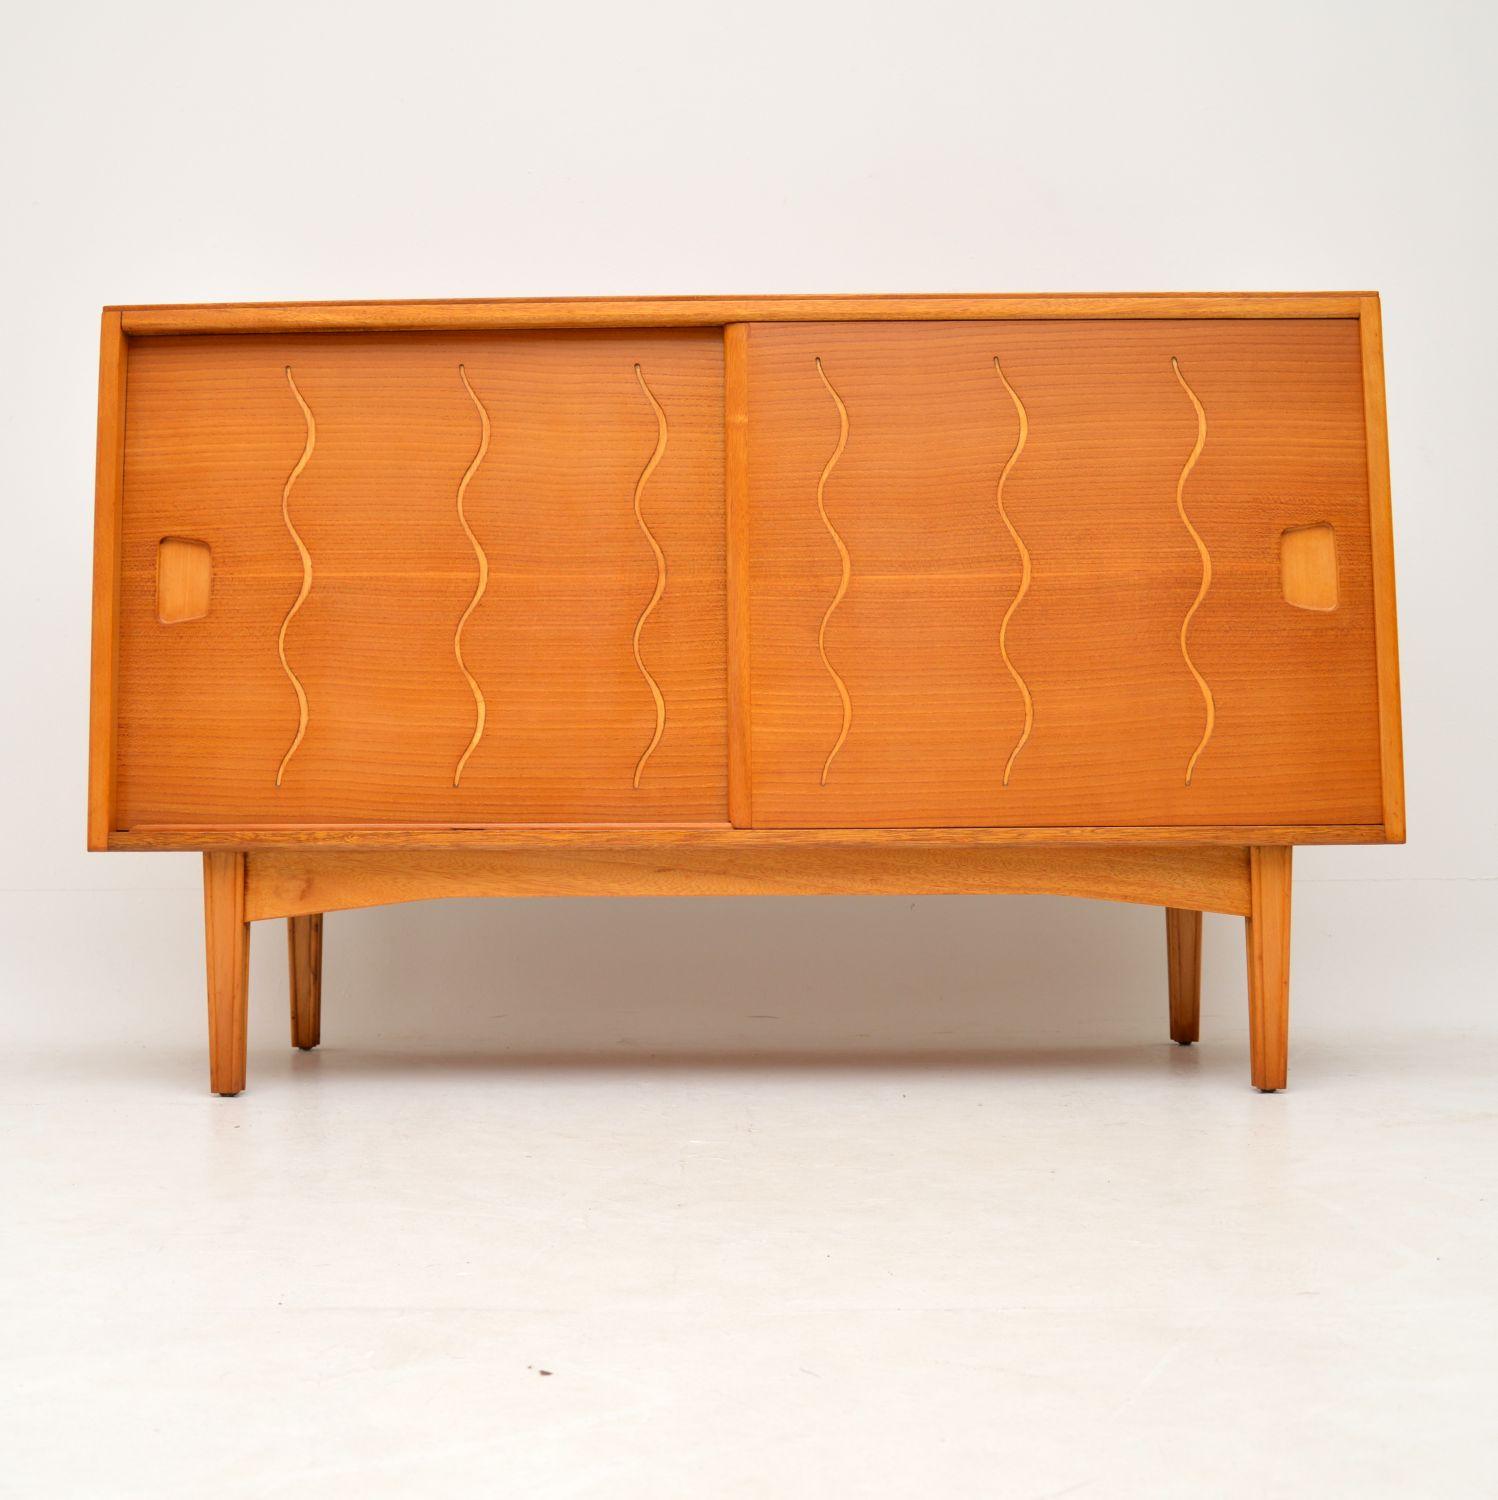 A stunning and very unusual vintage sideboard, this has a walnut carcass, elm sliding doors and lovely grooved etched patterns on the doors. The front is also angled at a slight slope, giving this an even more interesting design. This is British,